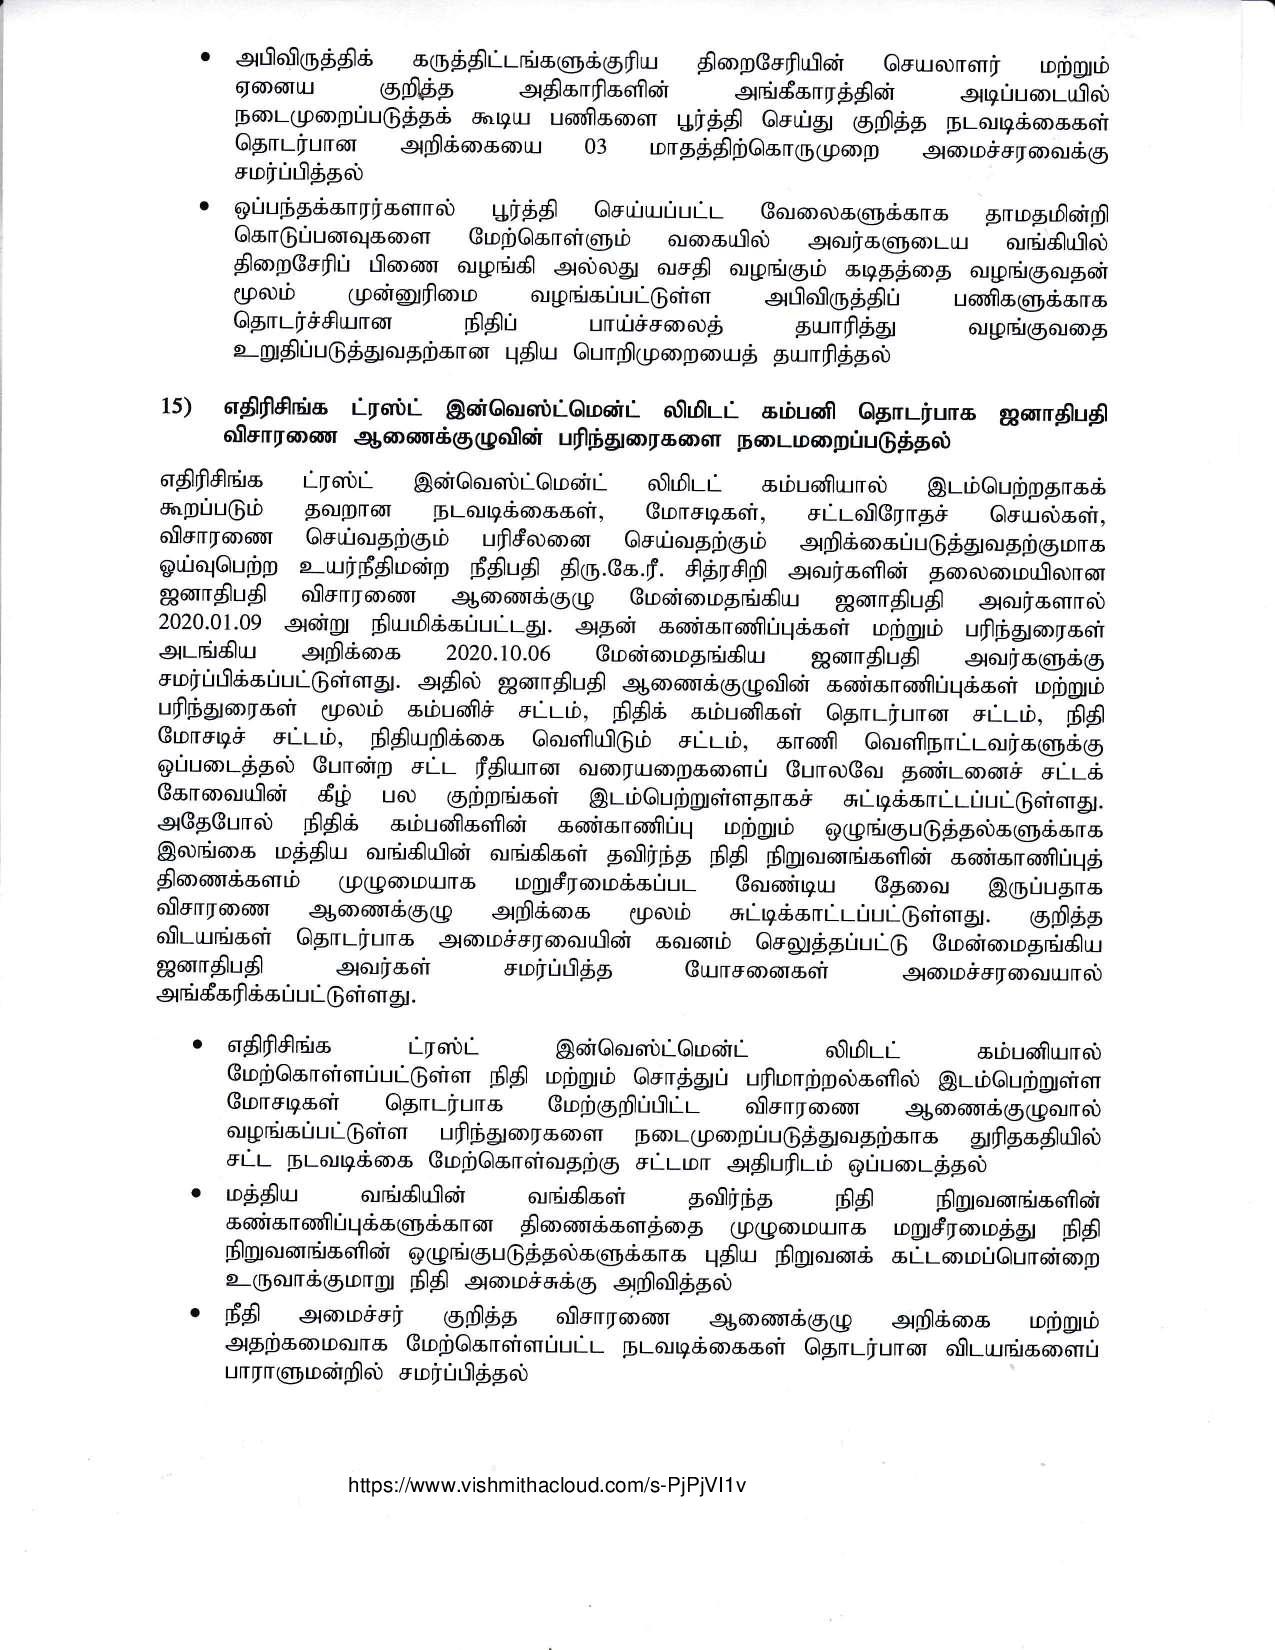 Cabinet Decision on 12.10.2020 Tamil compressed page 007